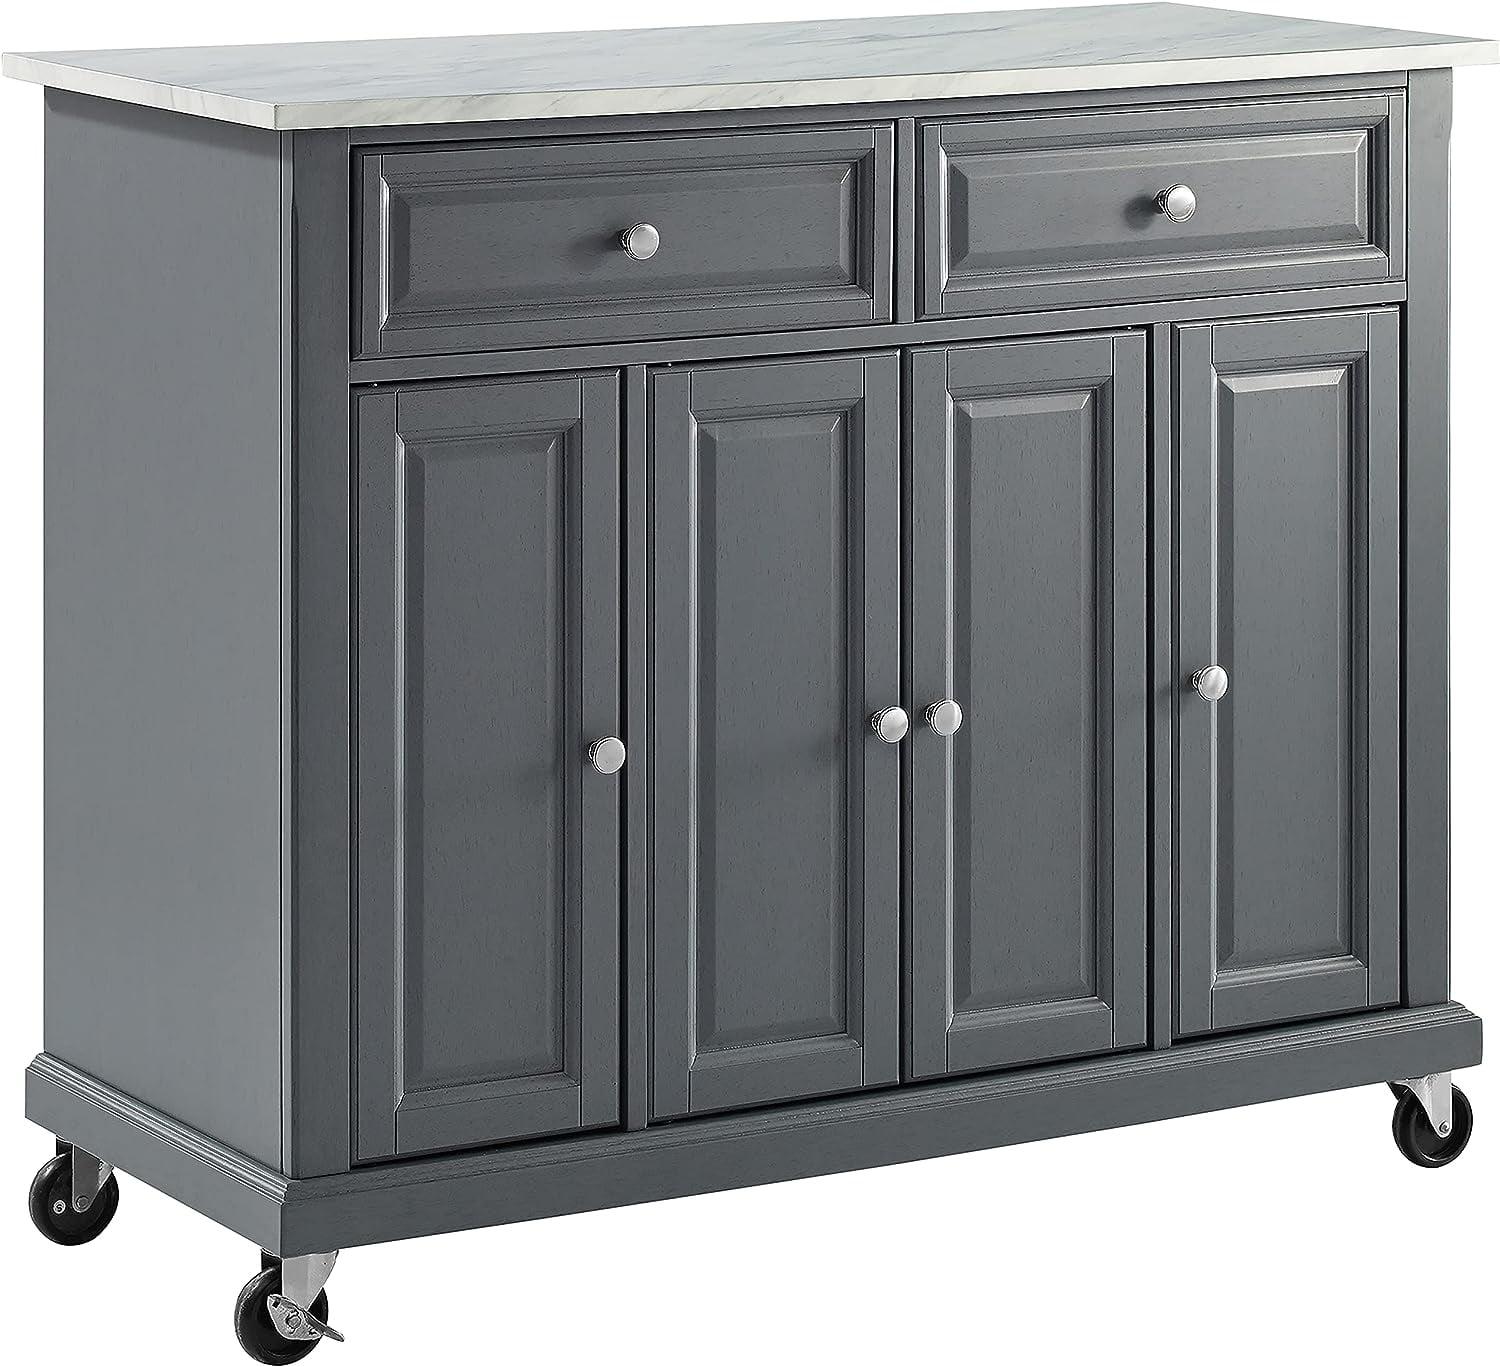 Traditional Gray Granite-Top Birch Kitchen Cart with Nickel Accents